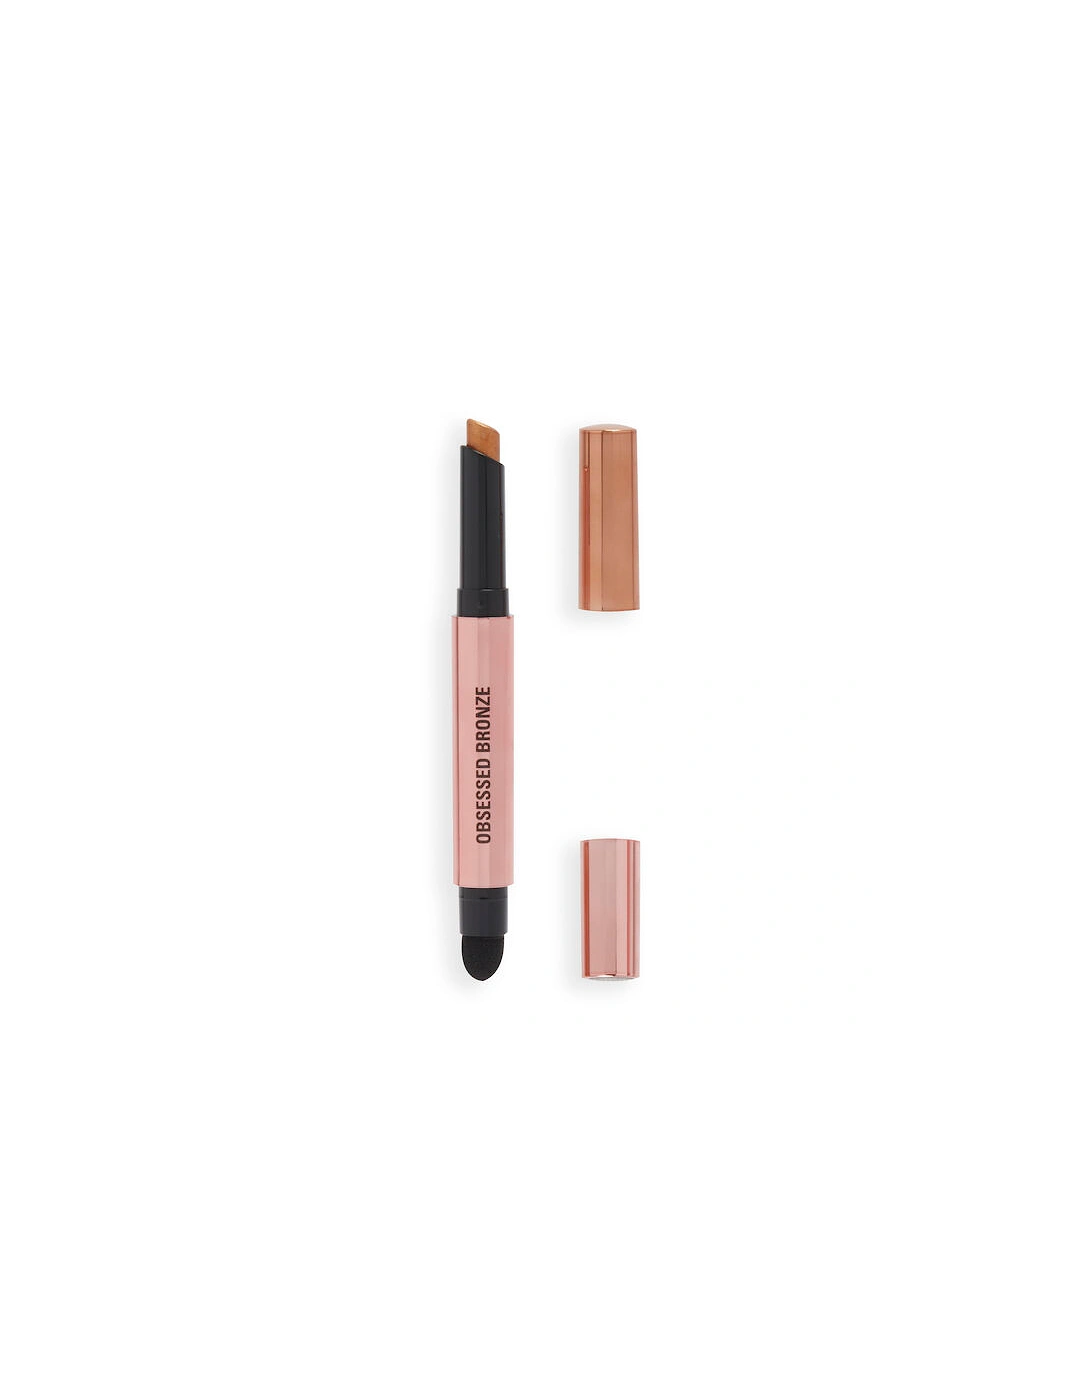 Makeup Lustre Wand Eyeshadow Stick Obsessed Bronze, 2 of 1